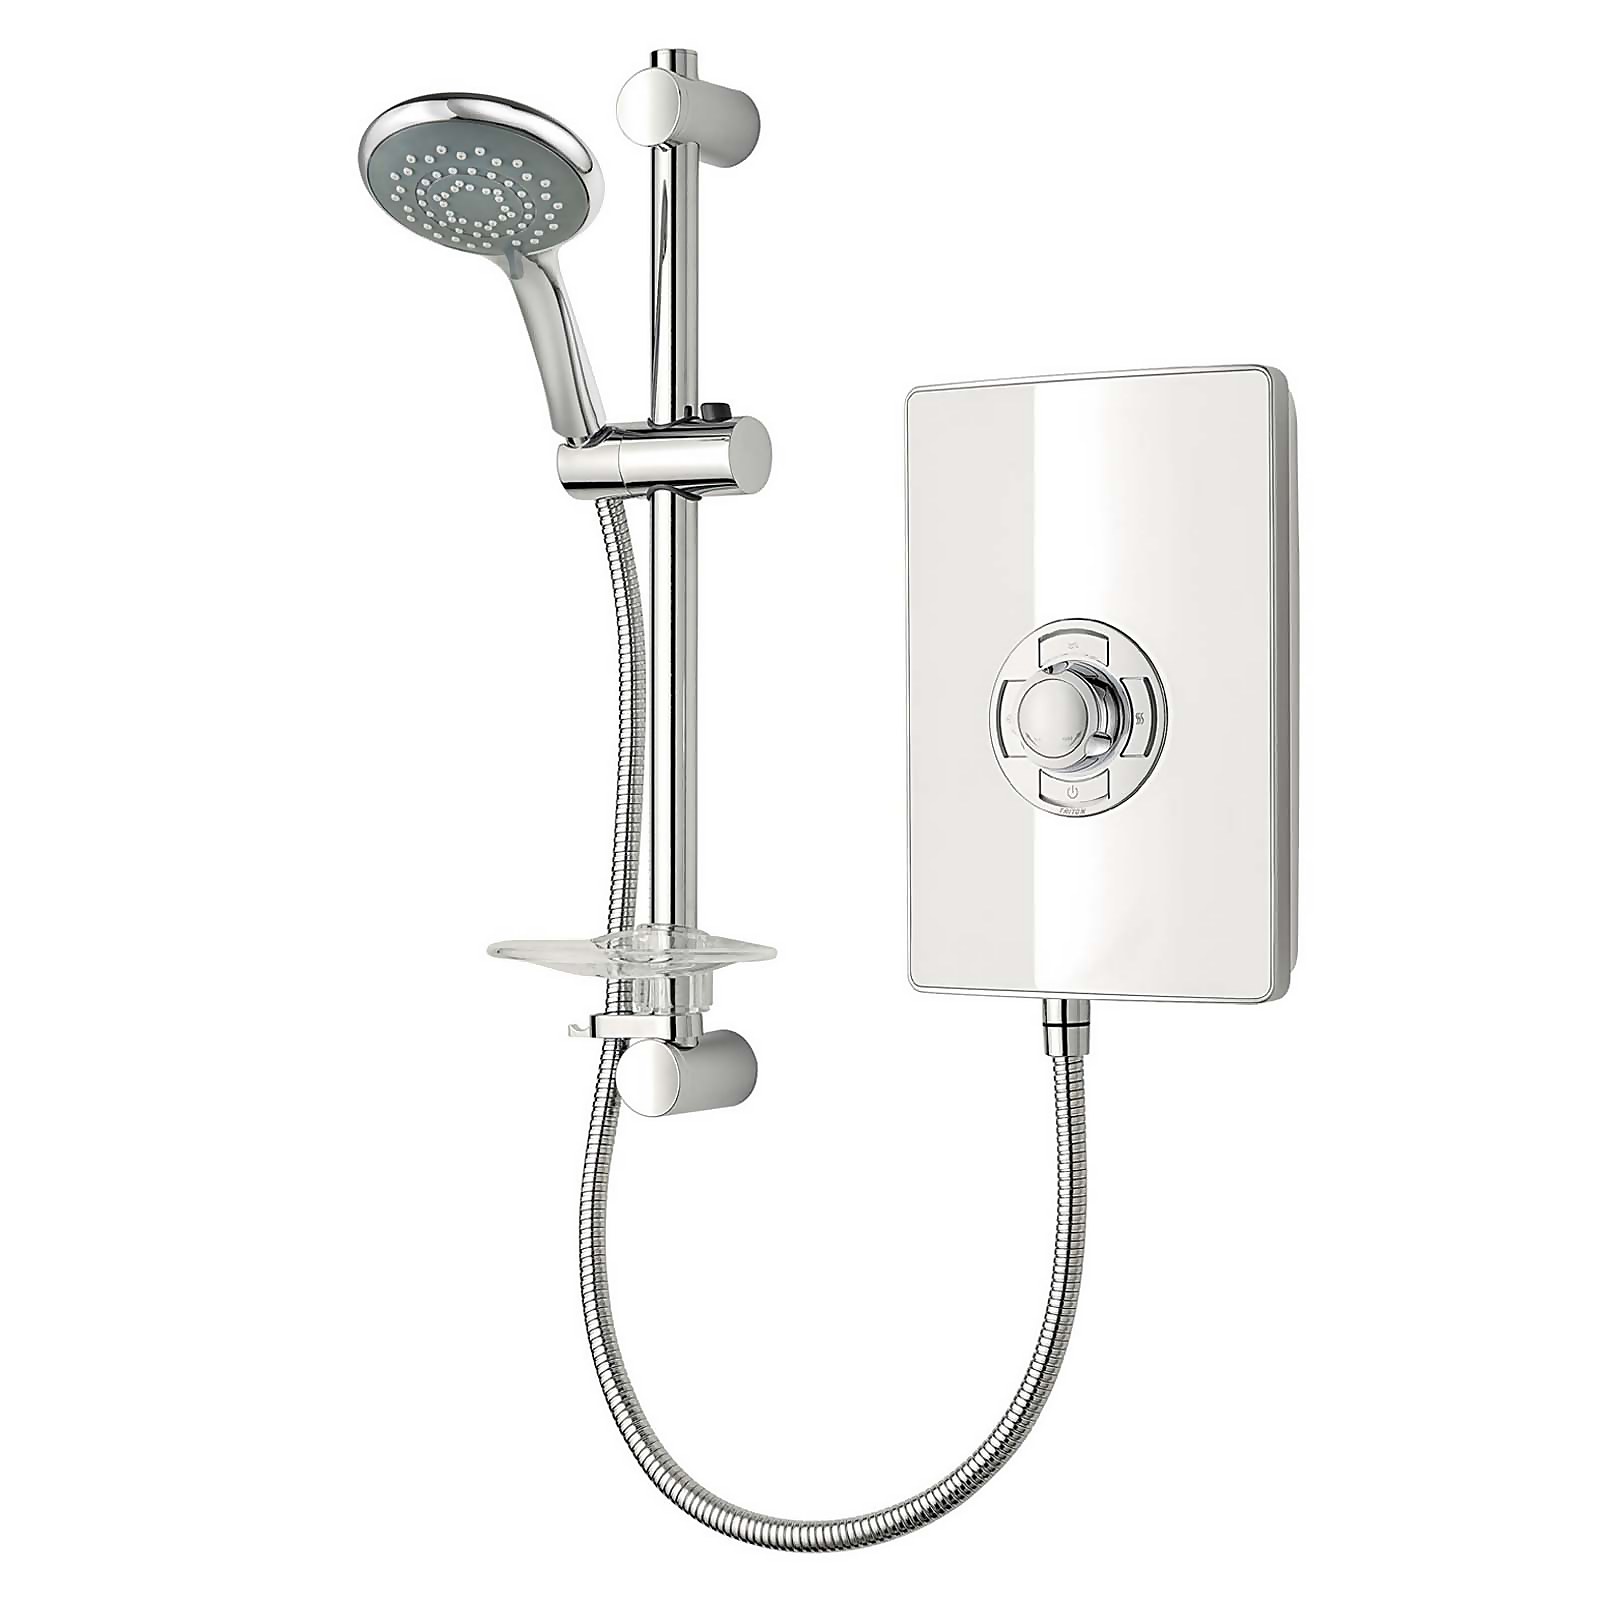 Photo of Triton Collection 8.5kw Electric Shower - Gloss White